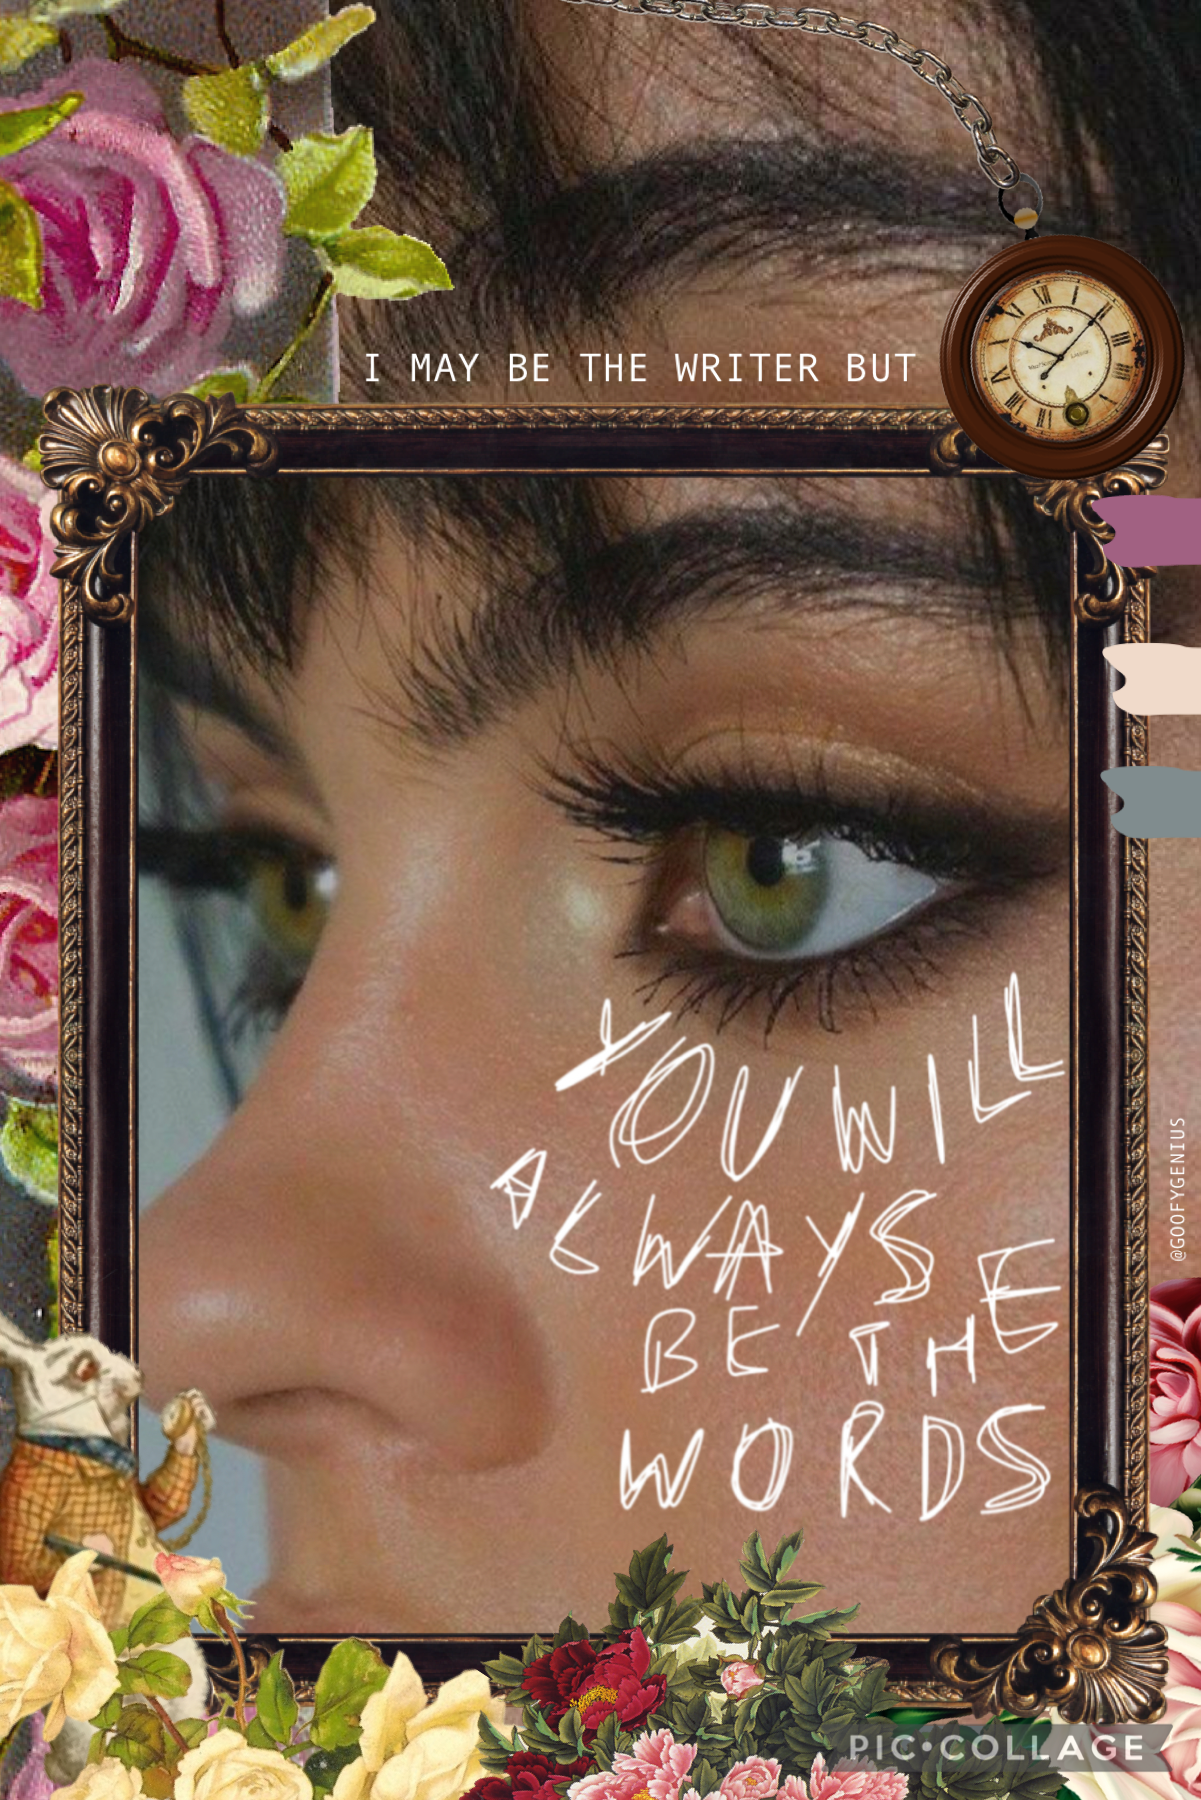 🕰 Tap Here 🕰
This originally was a experimental collage with just the scribble text on the Cheek, but it somehow transitioned into a wonderland theme.I apologize for disappearing out of nowhere! Please rate 1-10.
QOTD: laptop or tablet?
AOTD: laptop 